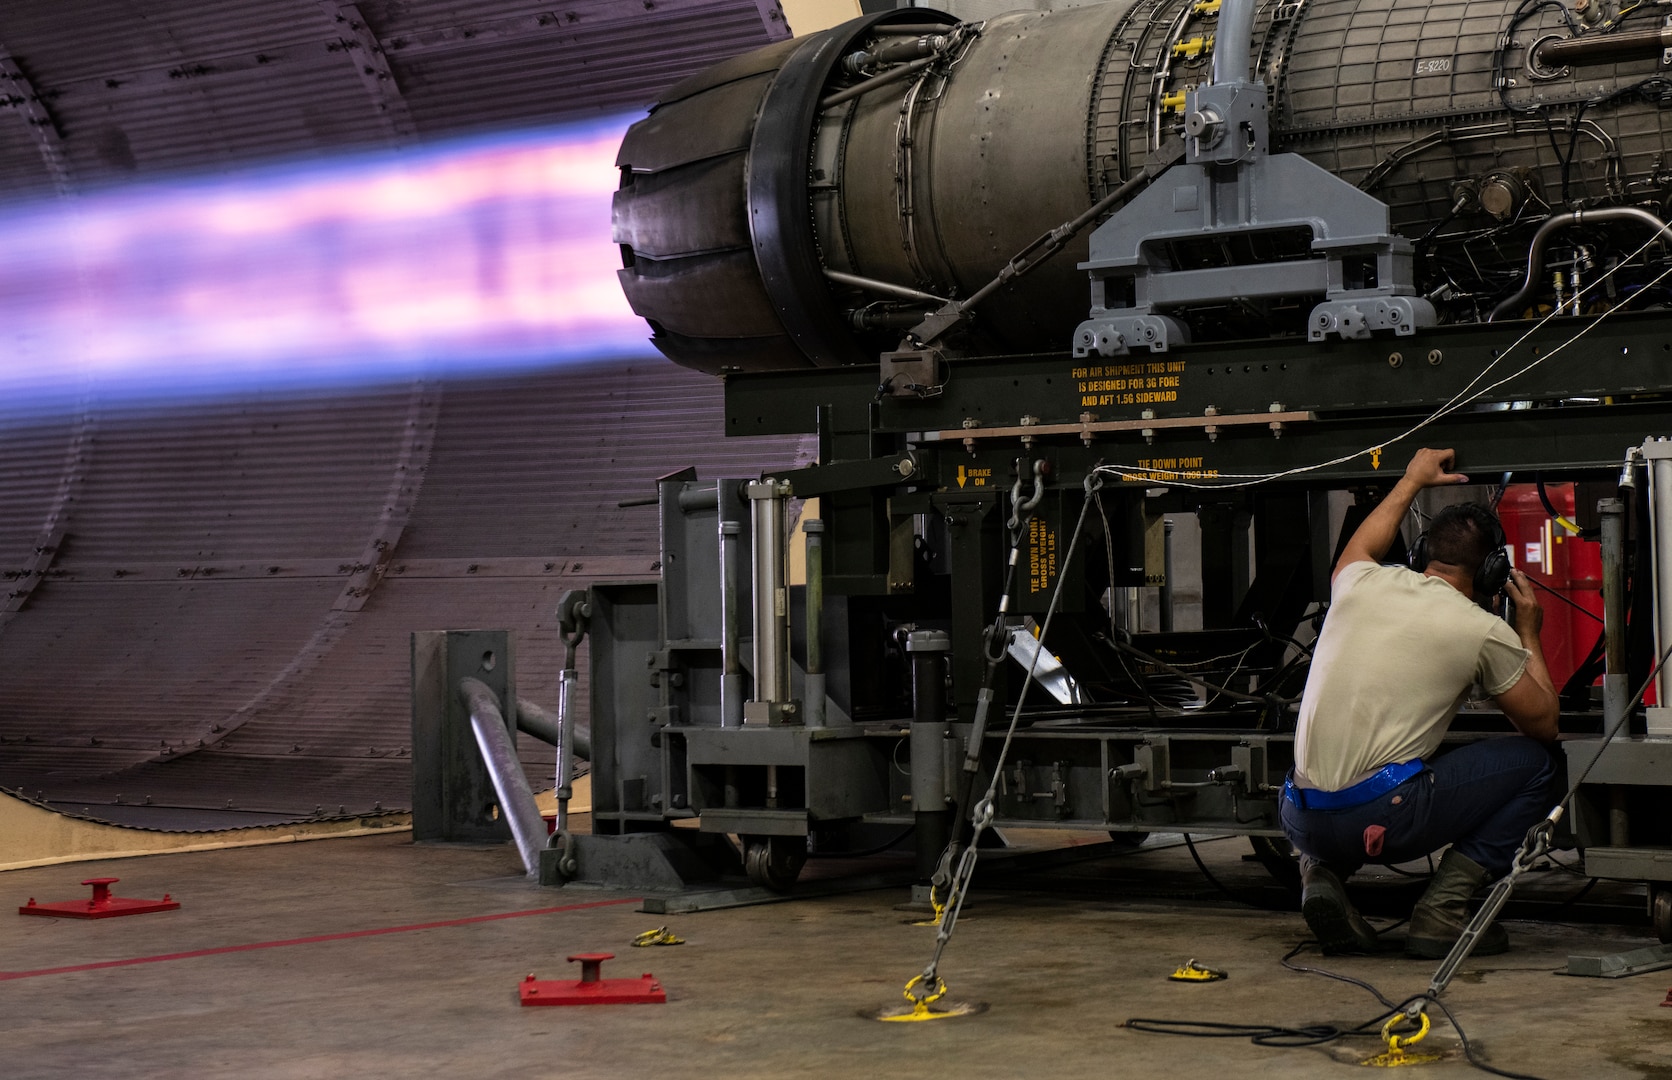 U.S. Air Force Senior Airman Skyler Fleming, 20th Component Maintenance Squadron engine test facility (ETF) journeyman, inspects an active General Electric F110-GE-129 engine at Shaw Air Force Base, S.C., May 29, 2019. Airmen assigned to the ETF facility ensure all engines tested are compliant with the standards set by General Electric engineers. (U.S. Air Force photo by Senior Airman Christopher Maldonado)